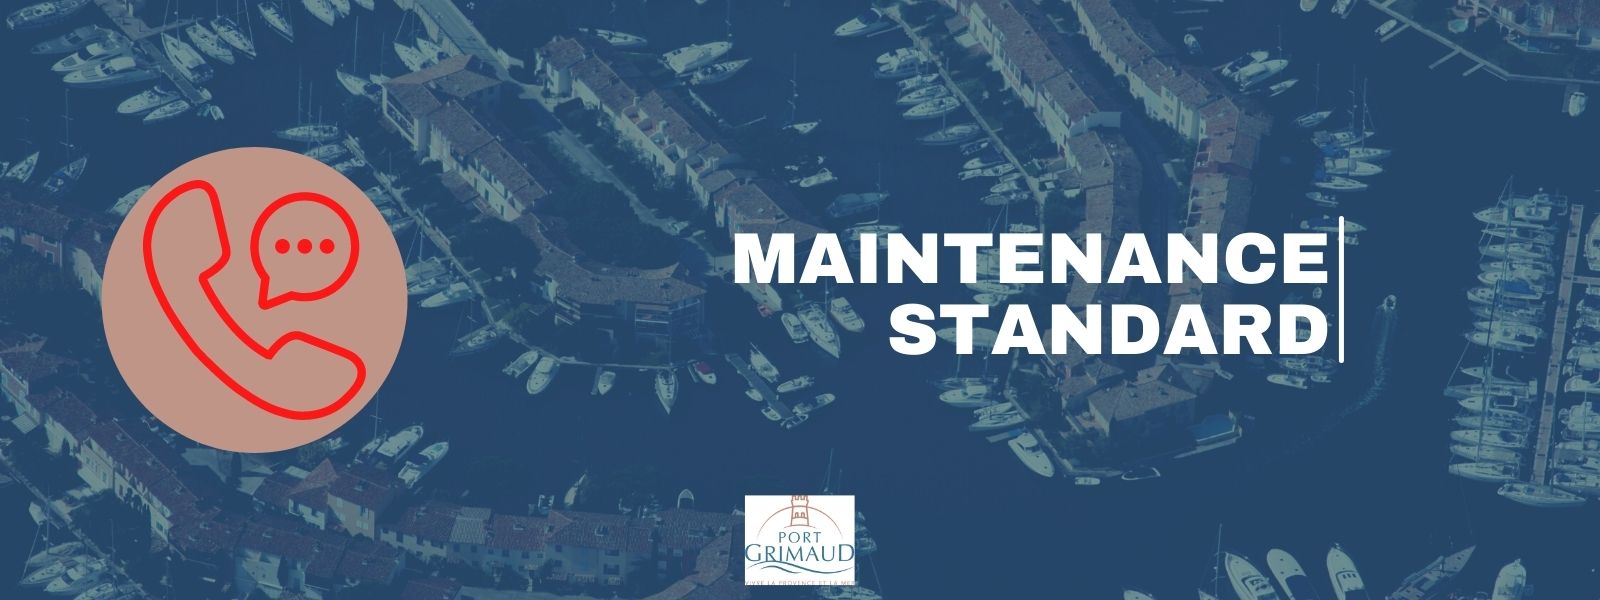 Wednesday, May 18, 2022: standard maintenance of the harbor master's office